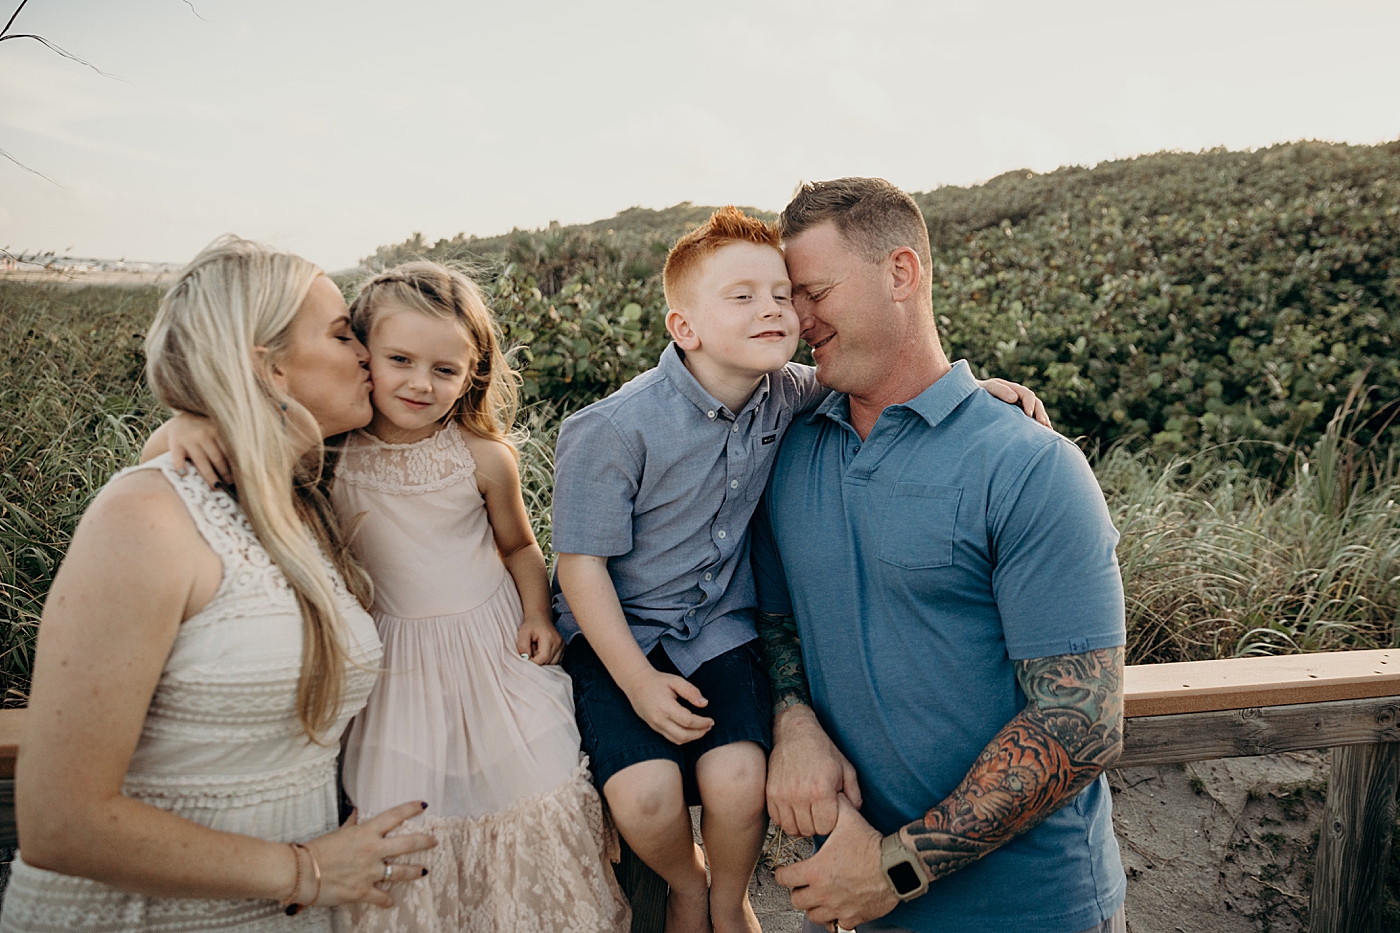 Mother kissing daughter on the cheek and father holding son close nuzzling Ocean Ridge Hammock Park Family Photography by South Florida Family Photographer Maggie Alvarez Photography